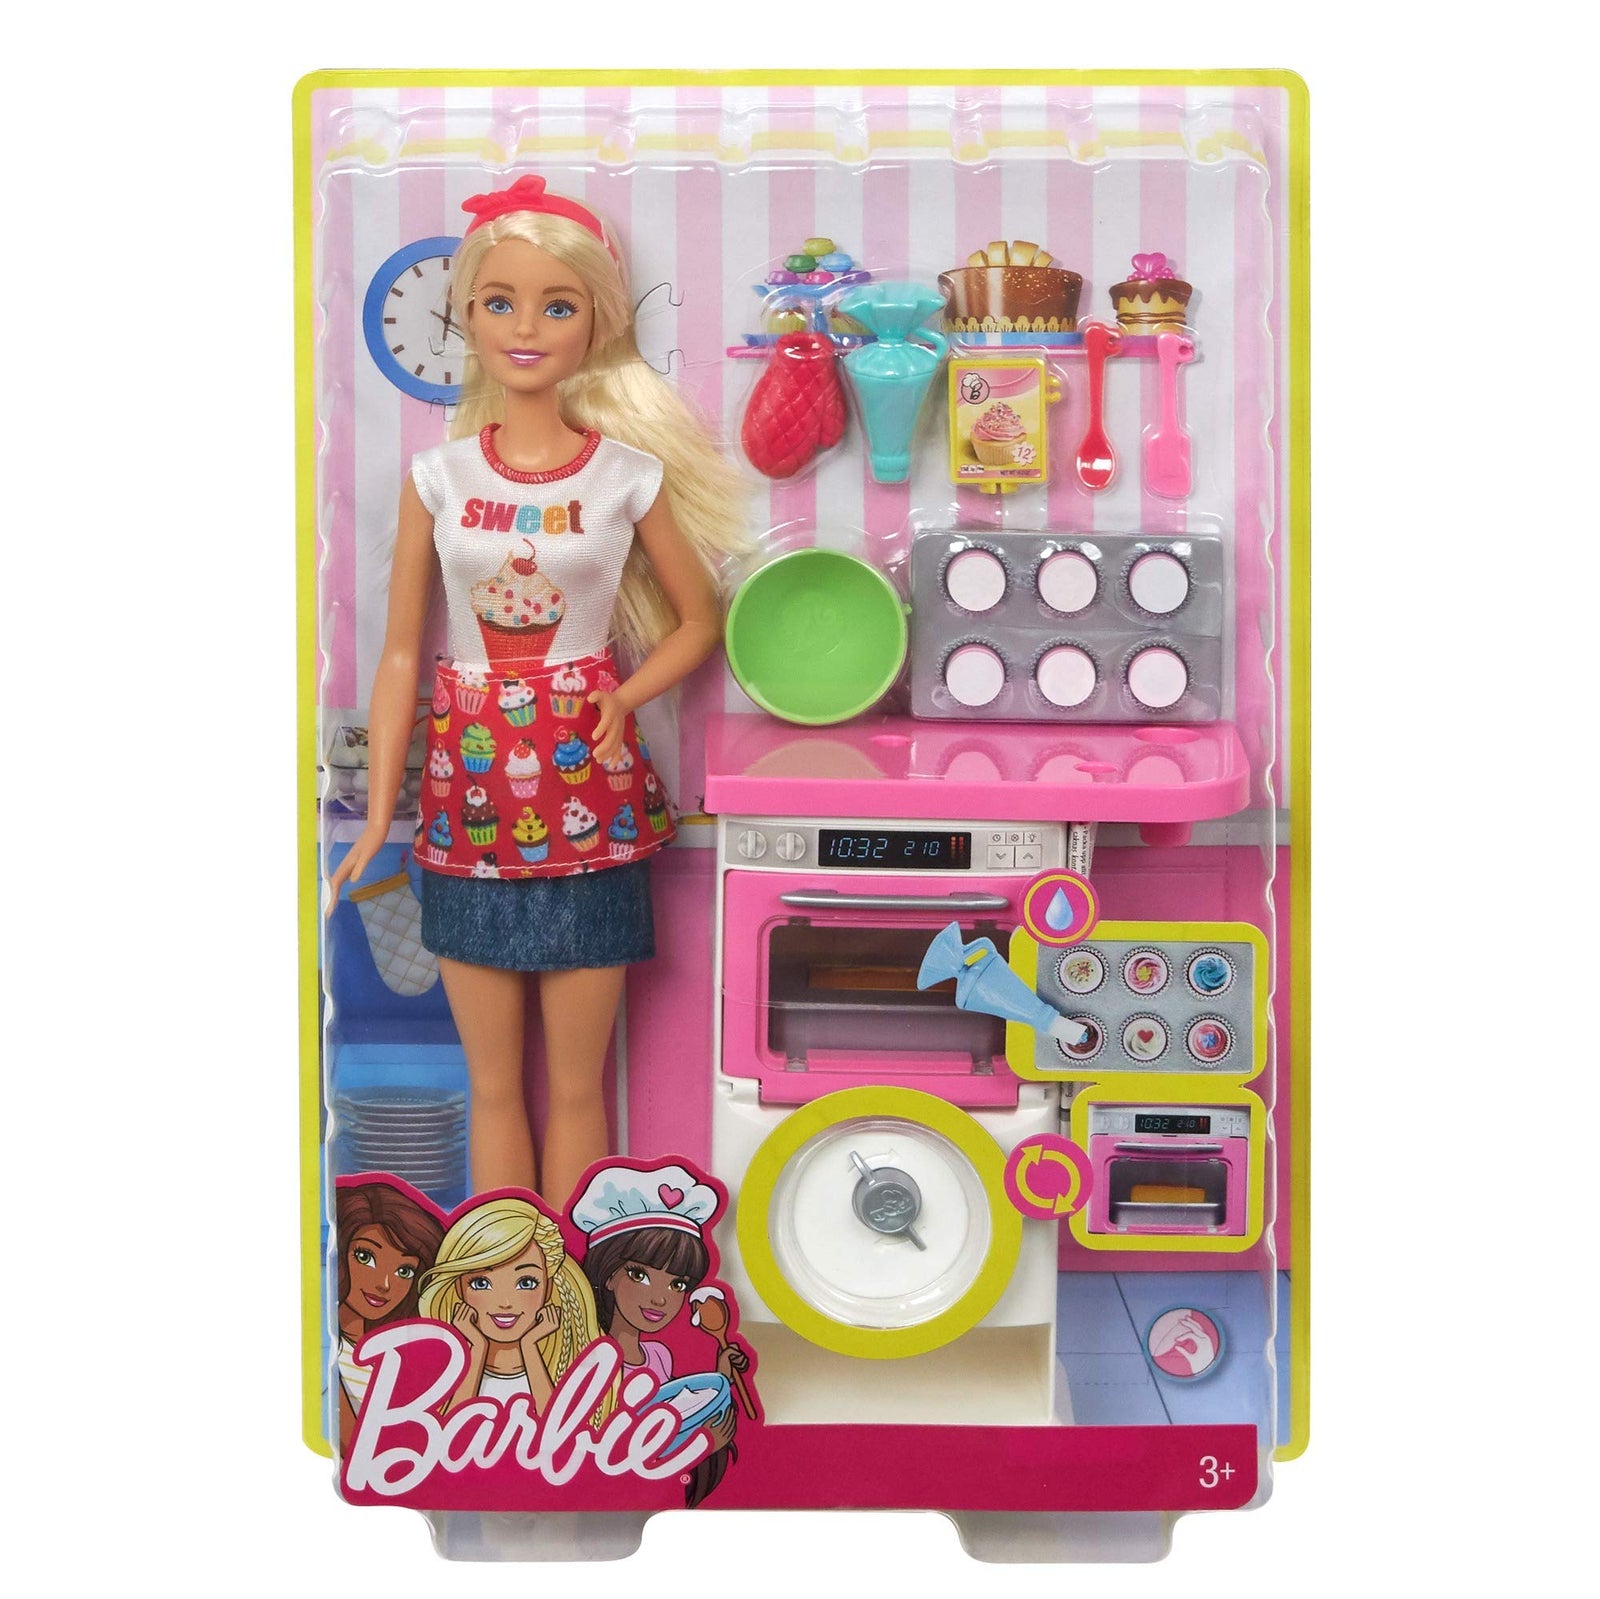 Barbie Bakery Chef Doll and Playset [Amazon Exclusive]